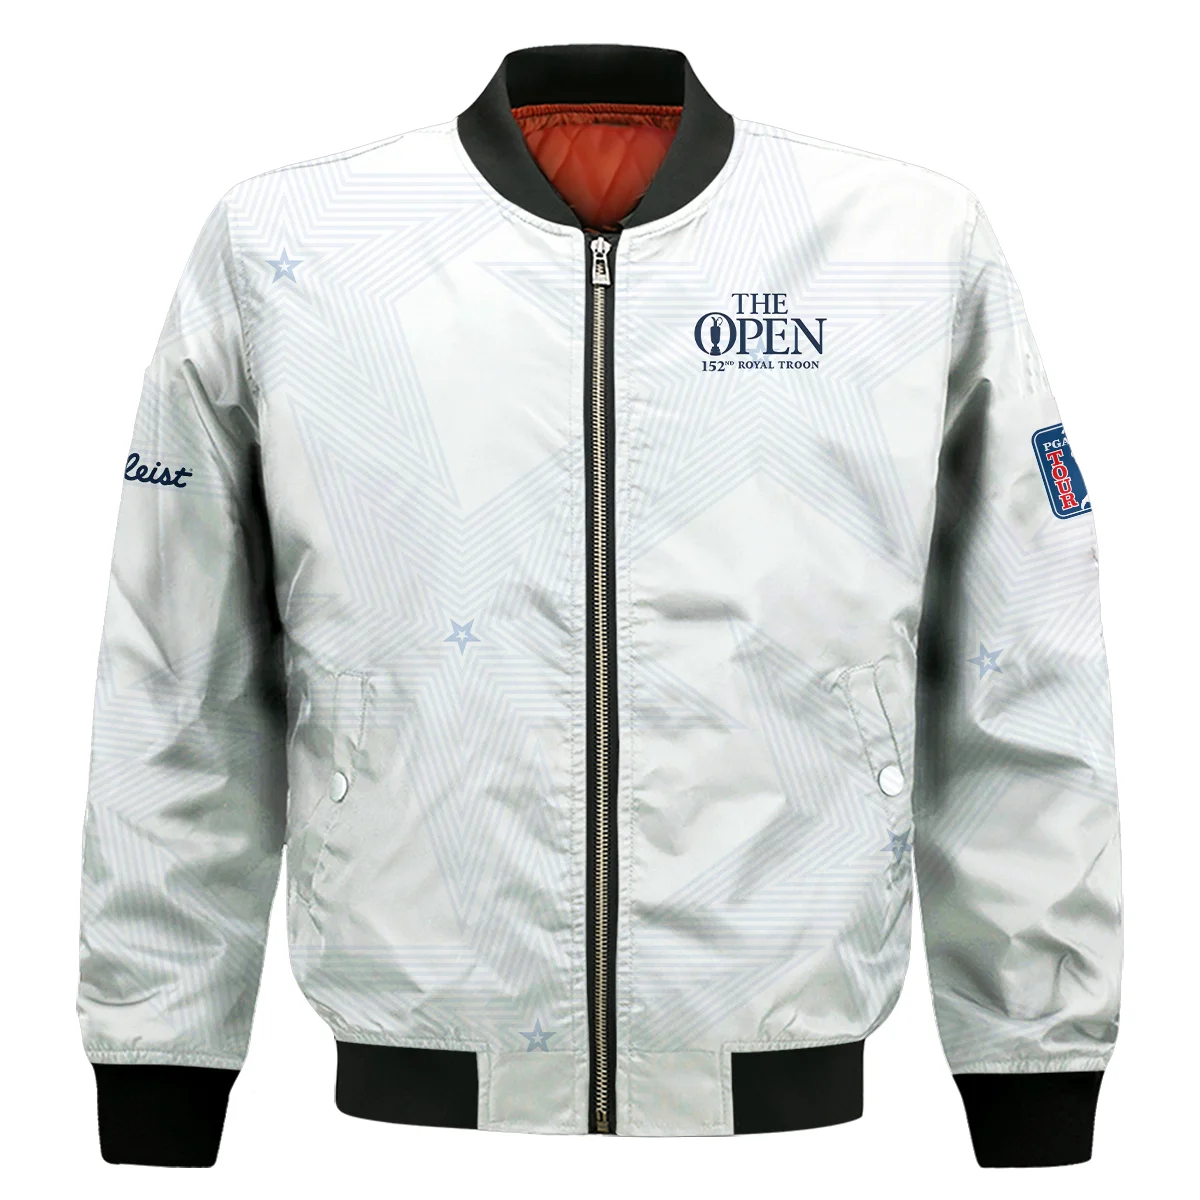 152nd The Open Championship Golf Titleist Bomber Jacket Stars White Navy Golf Sports All Over Print Bomber Jacket